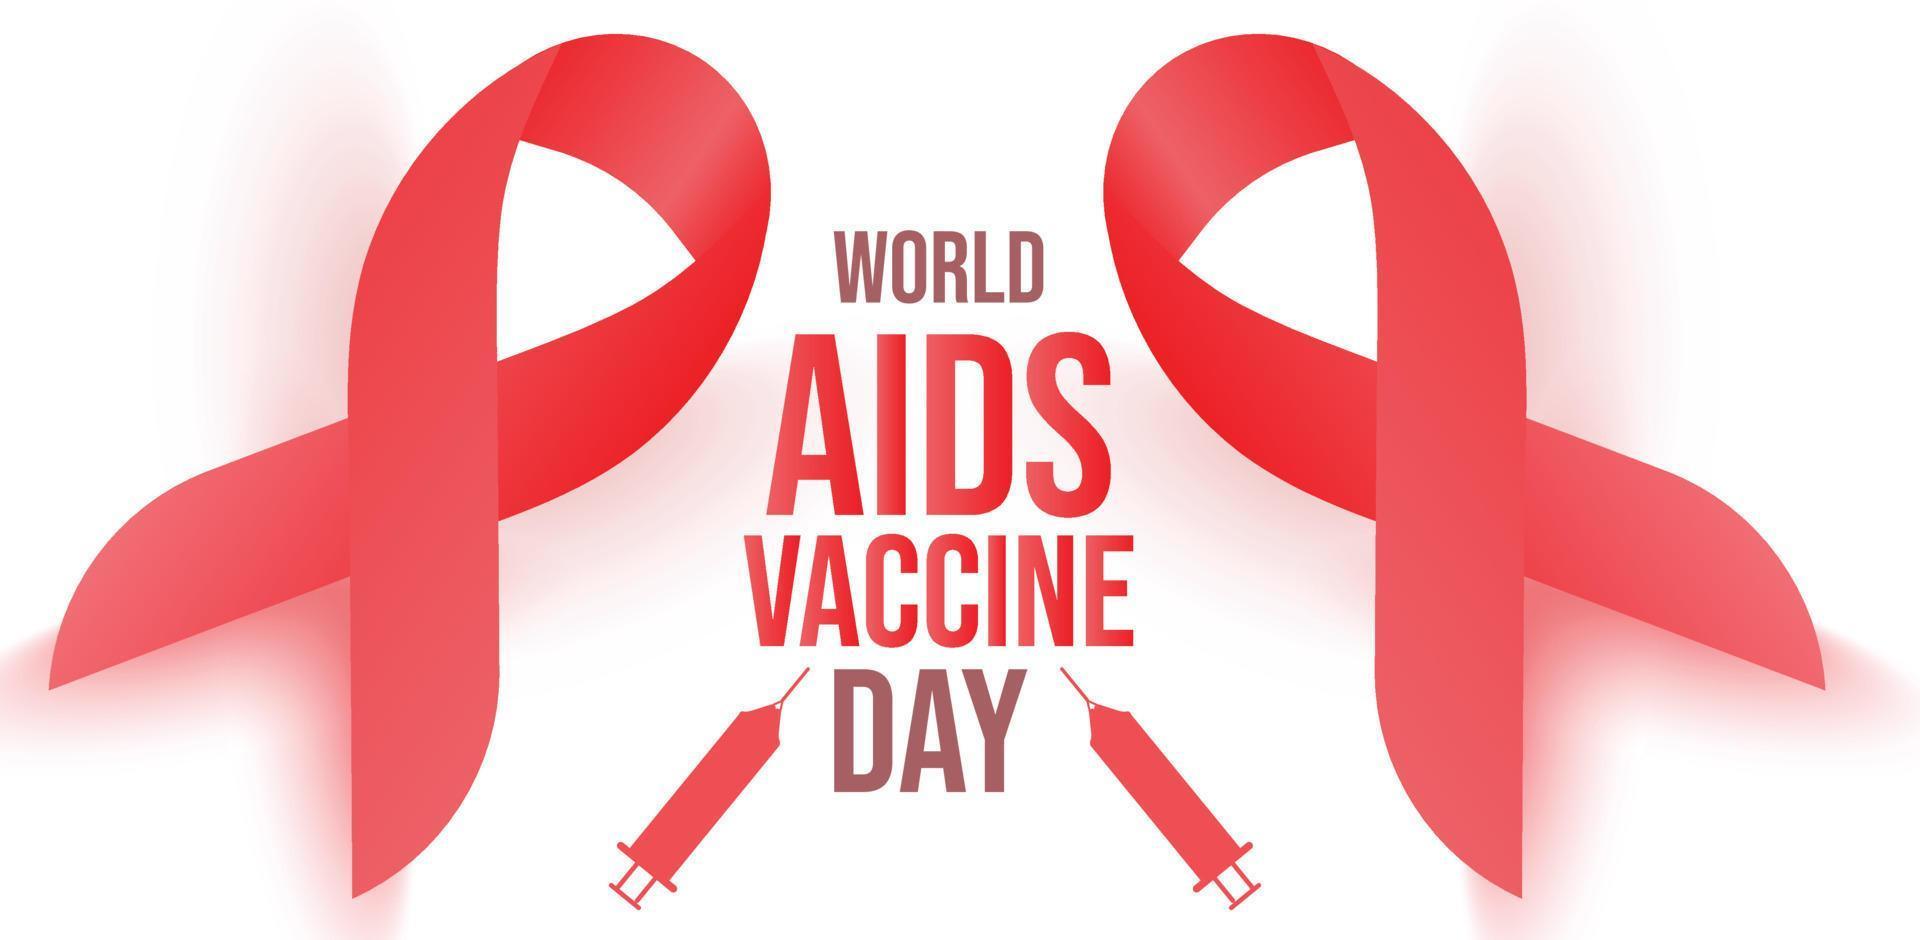 world aids vaccine day. Template for background, banner, card, poster. vector illustration.